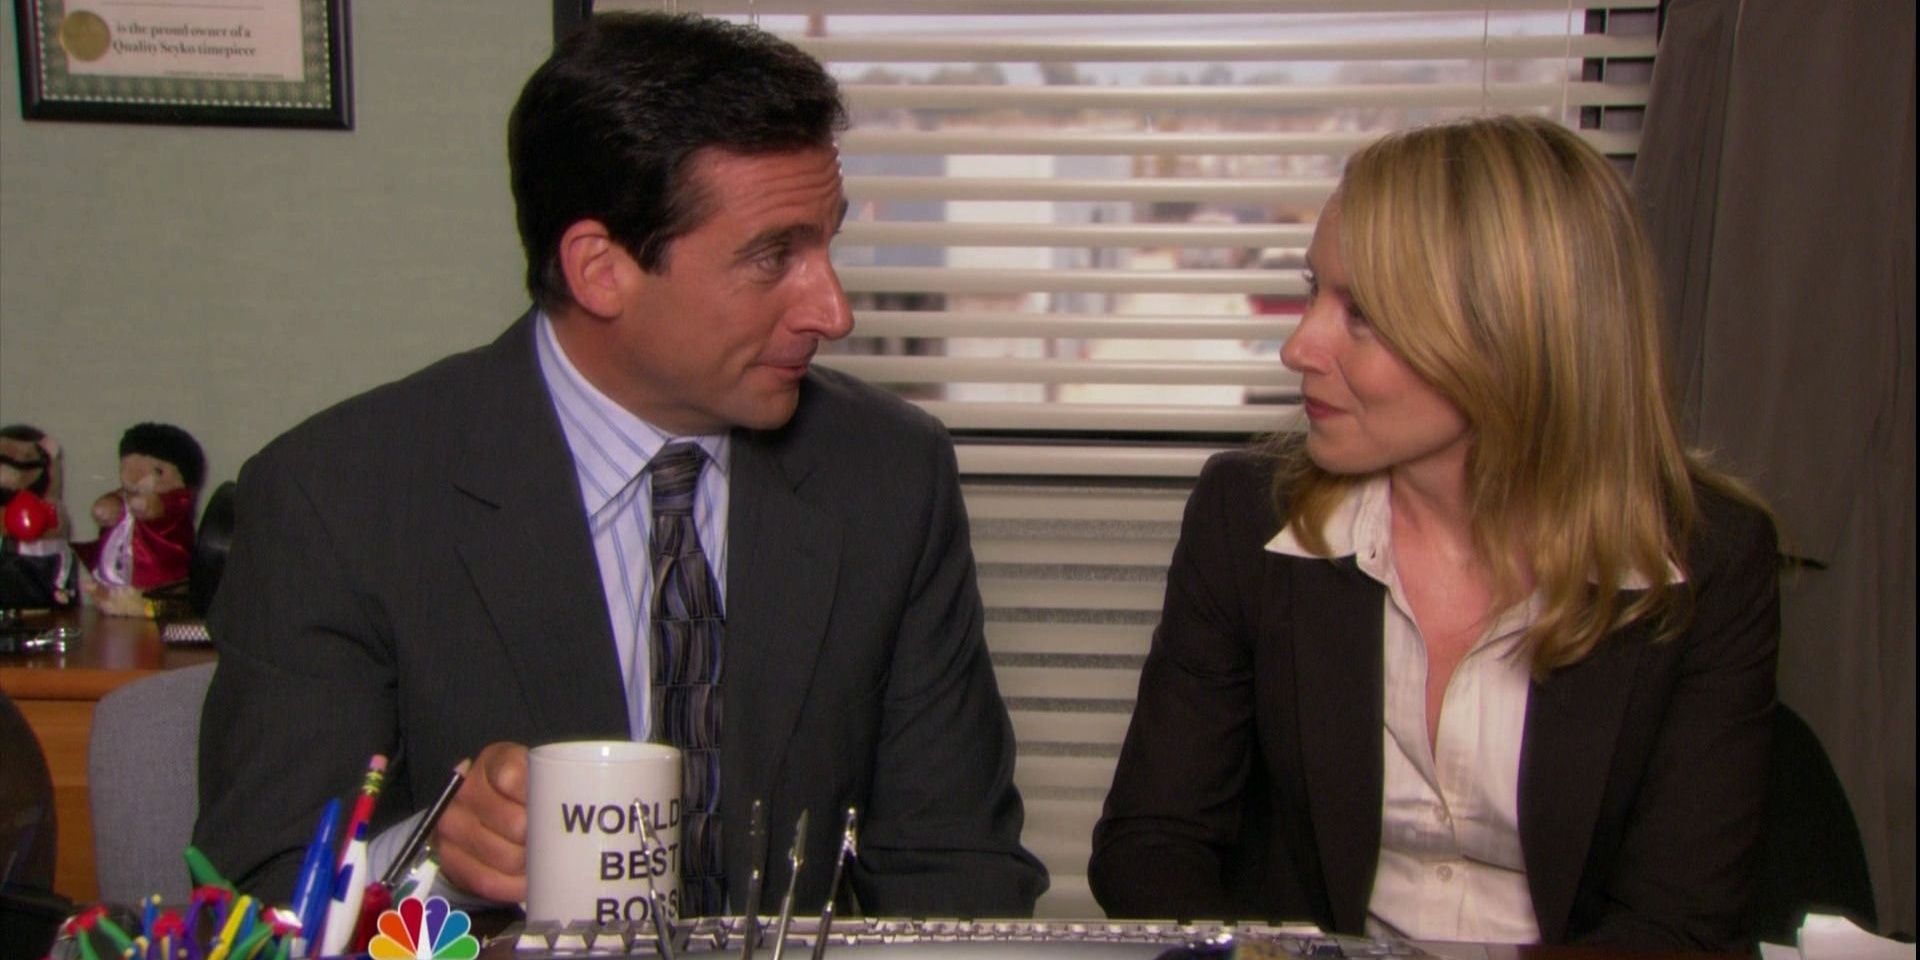 Michael and Holly from The Office sitting at a desk.